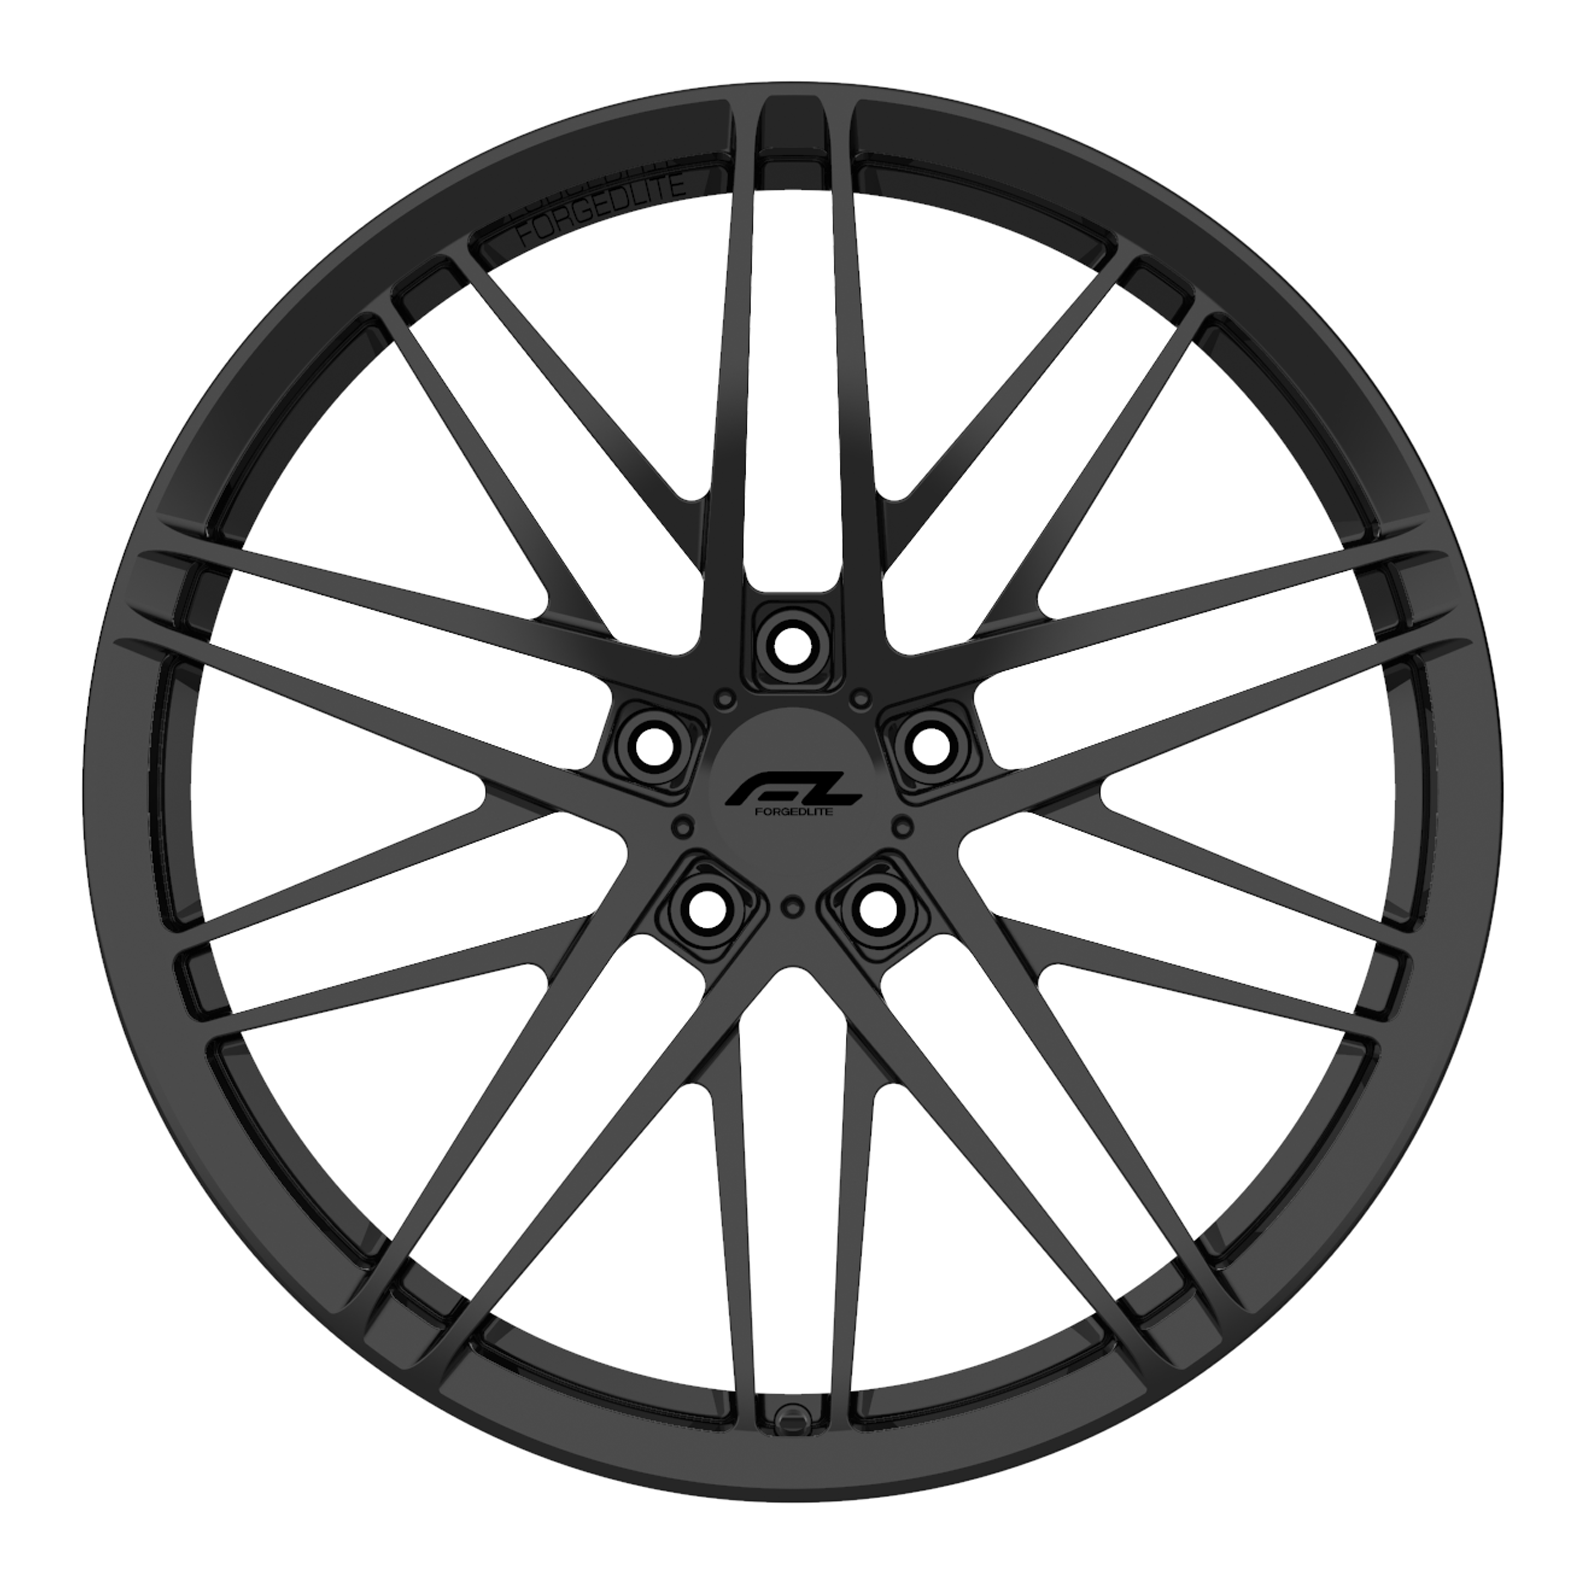 FORGEDLITE MC7 20X10 21X13 w/ MICHELIN PILOT SPORT 4S OR CUP 2R TIRES PACKAGE - Wheel Designers